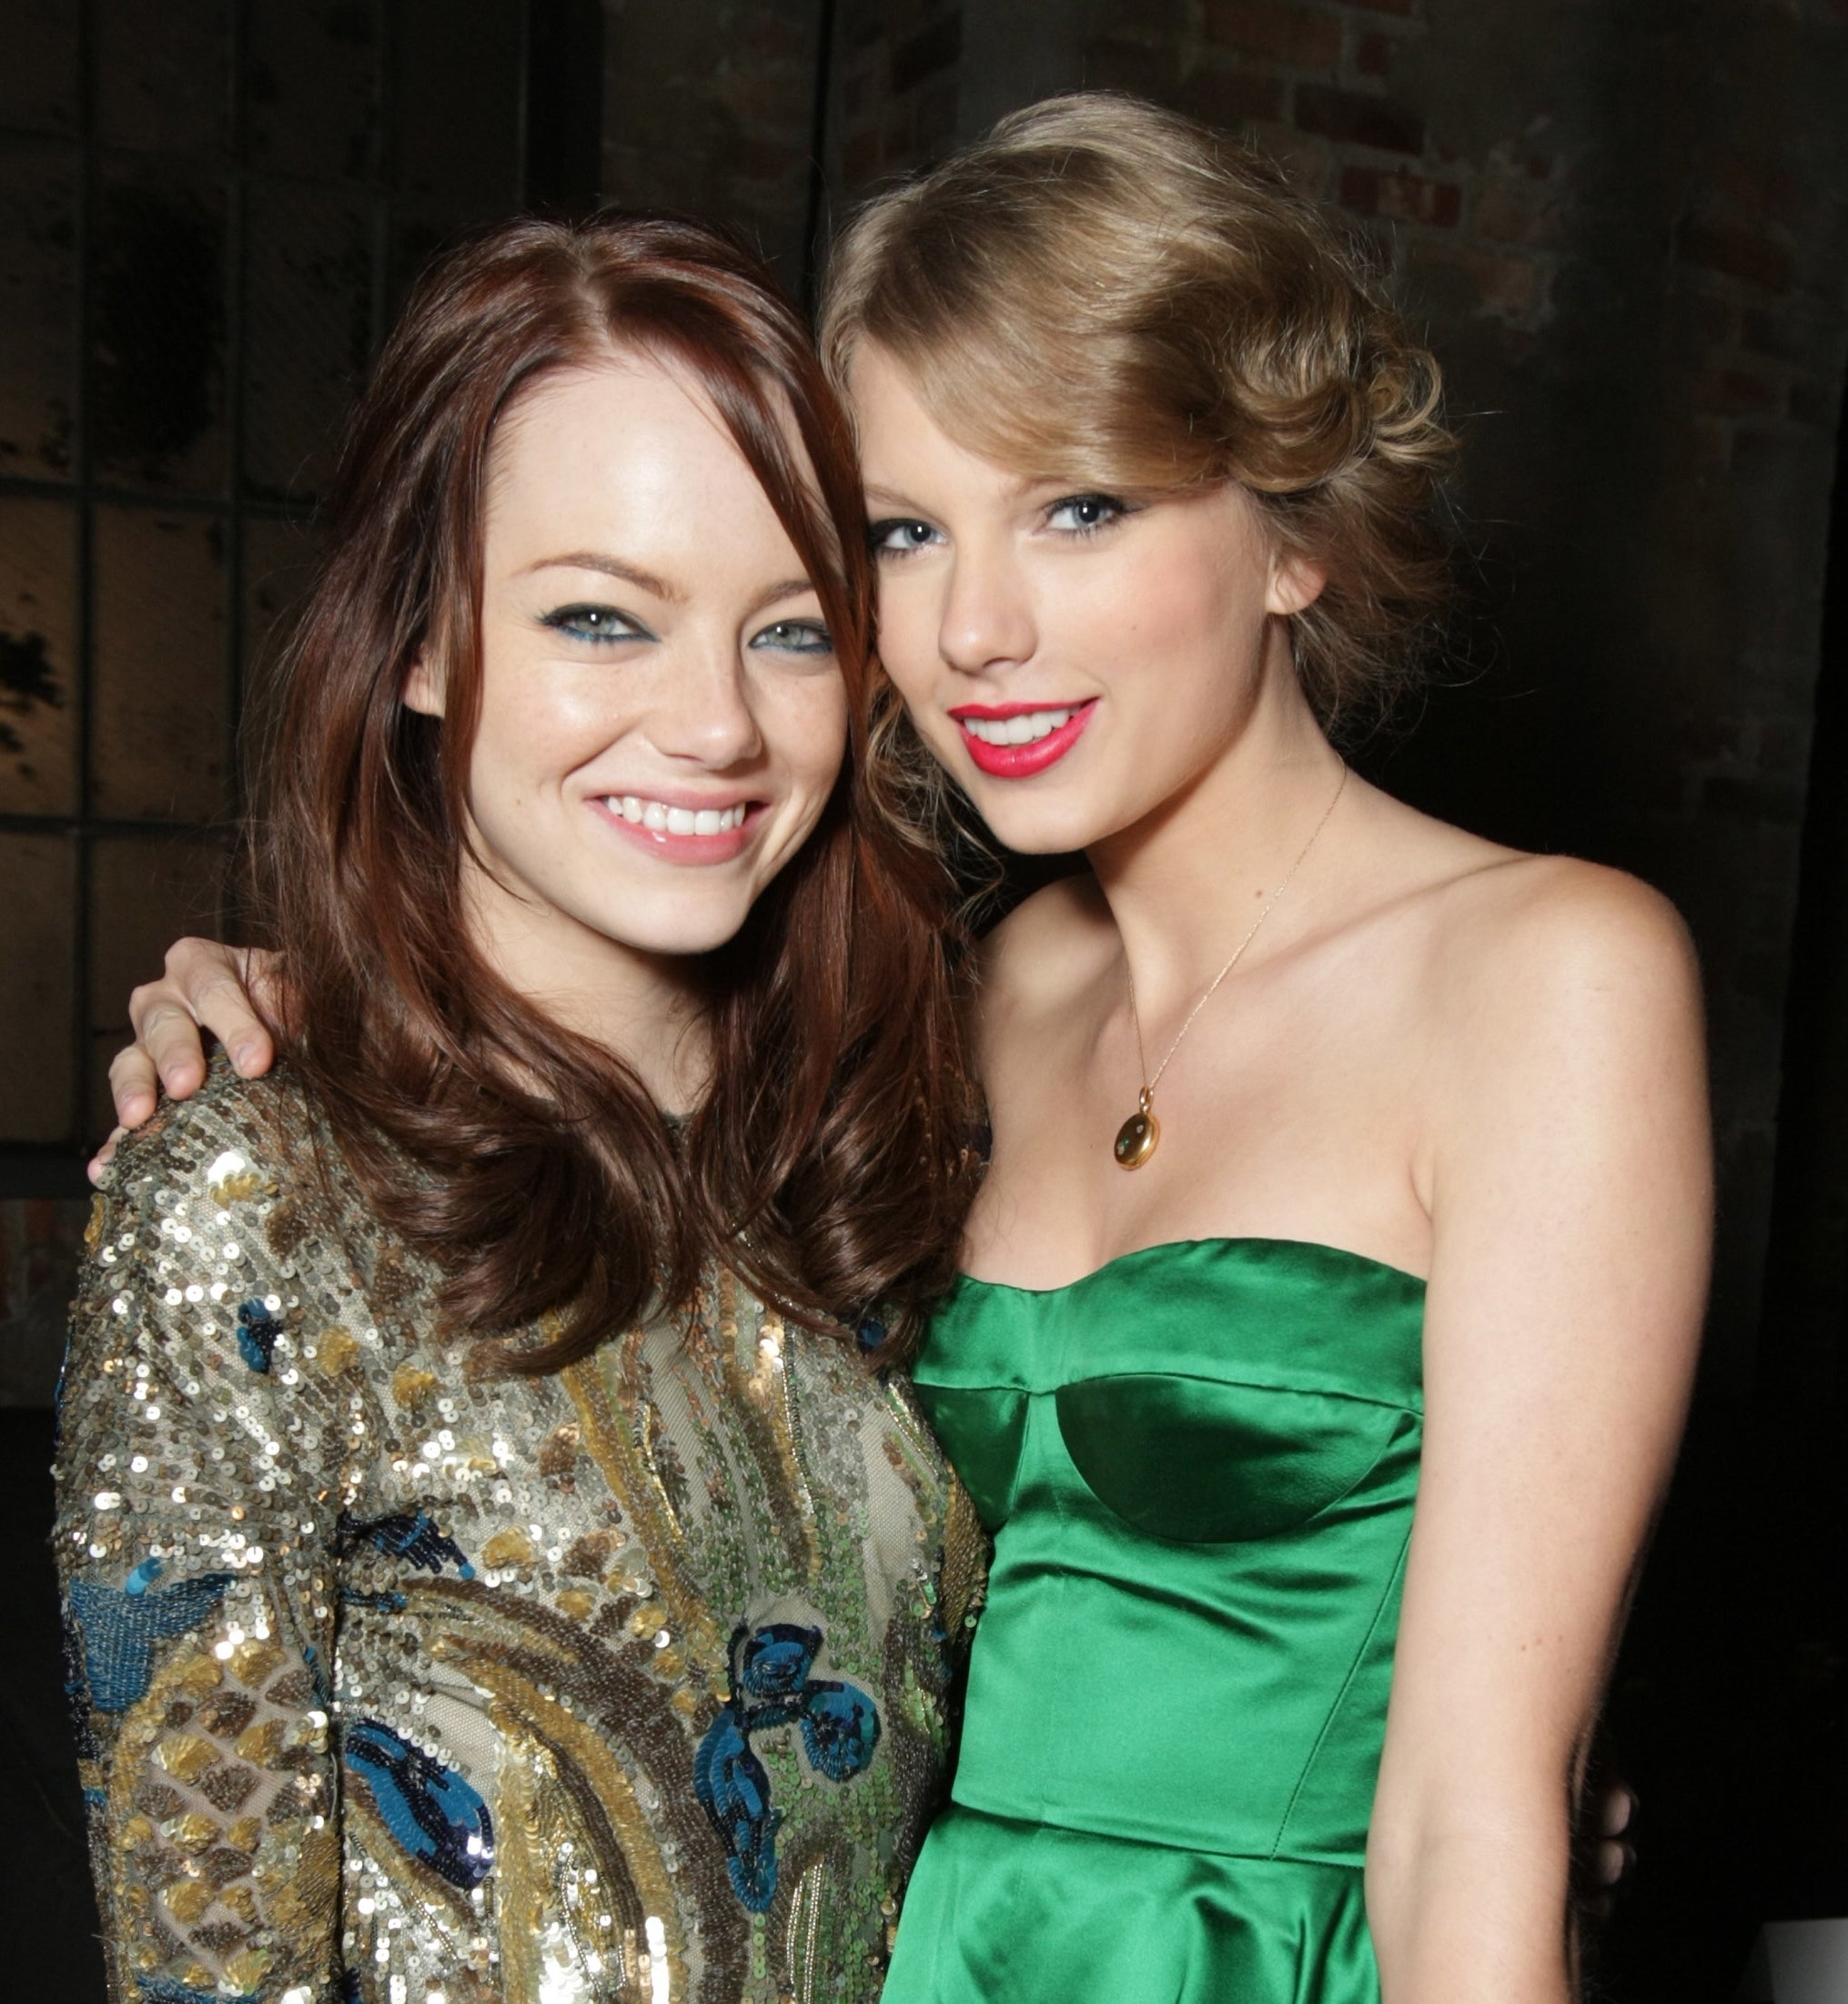 Emma Stone in a sequined dress and Taylor Swift in a satin gown posing together